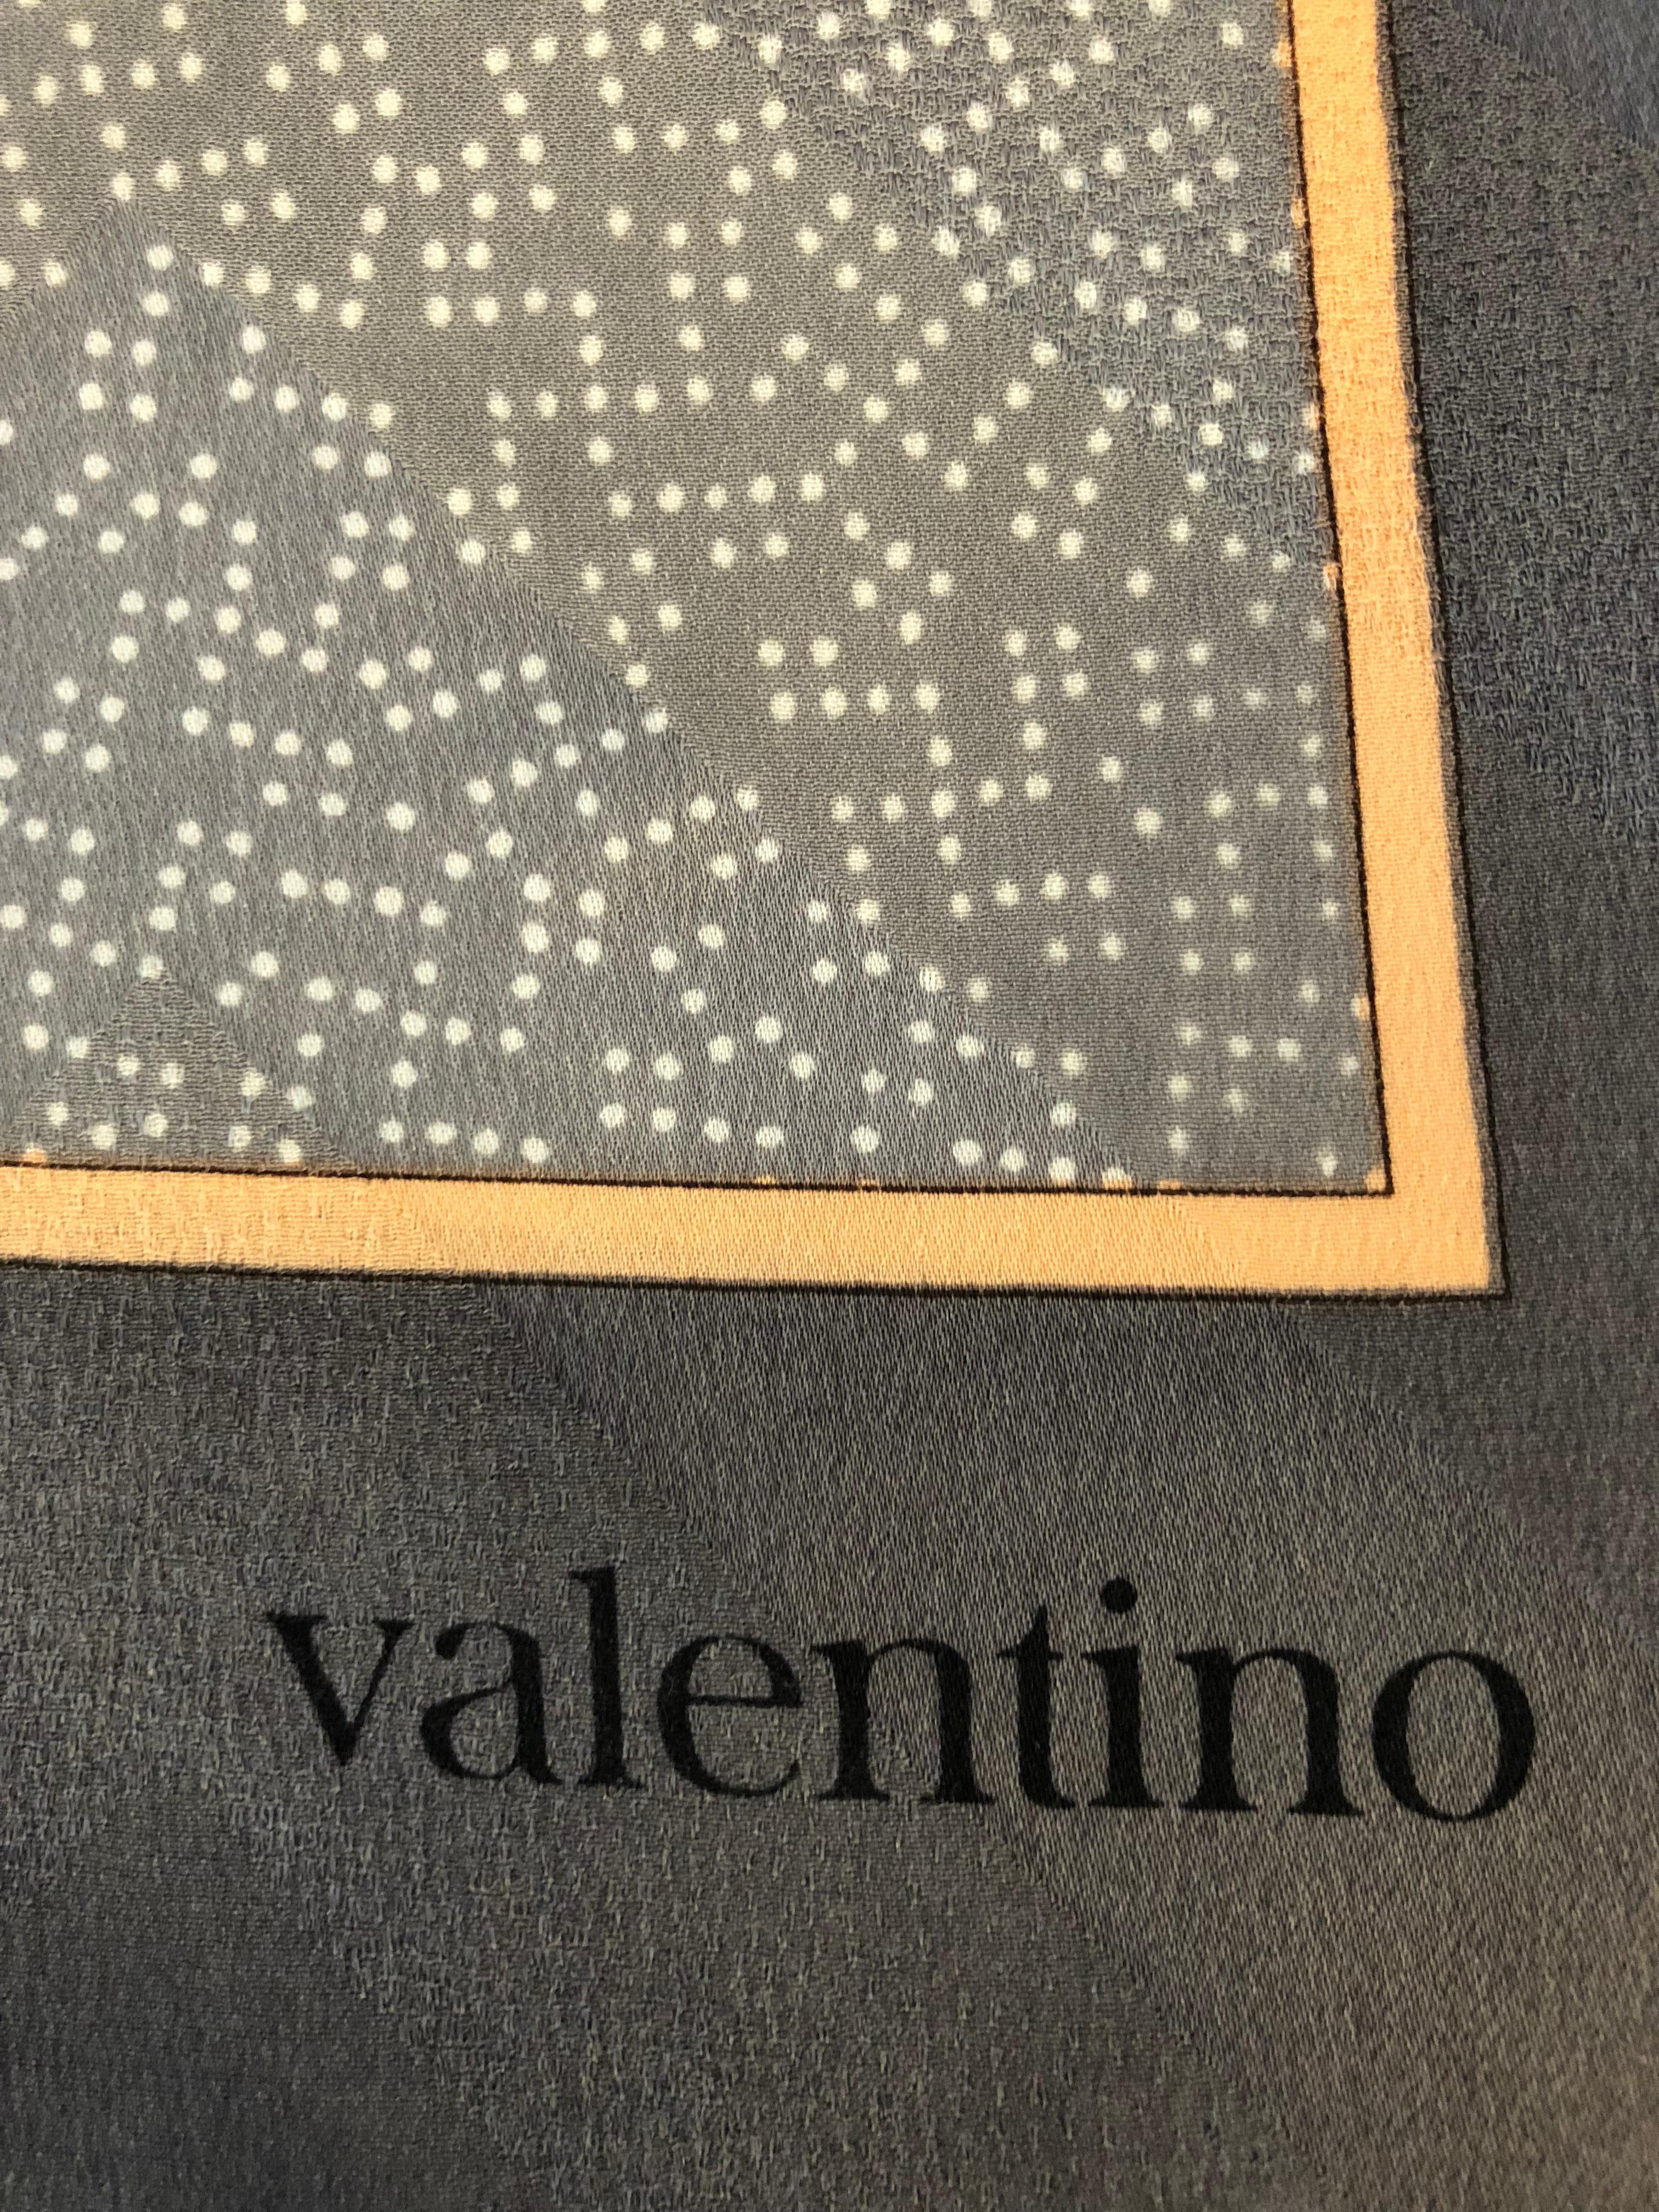 Beautiful Valentino silk scarf with interesting prints such as chevron background throughout; floral (I think from the Fritillaria family); white specks on a grey background and plain pink chevron bordered by a thin orange band followed by a wider